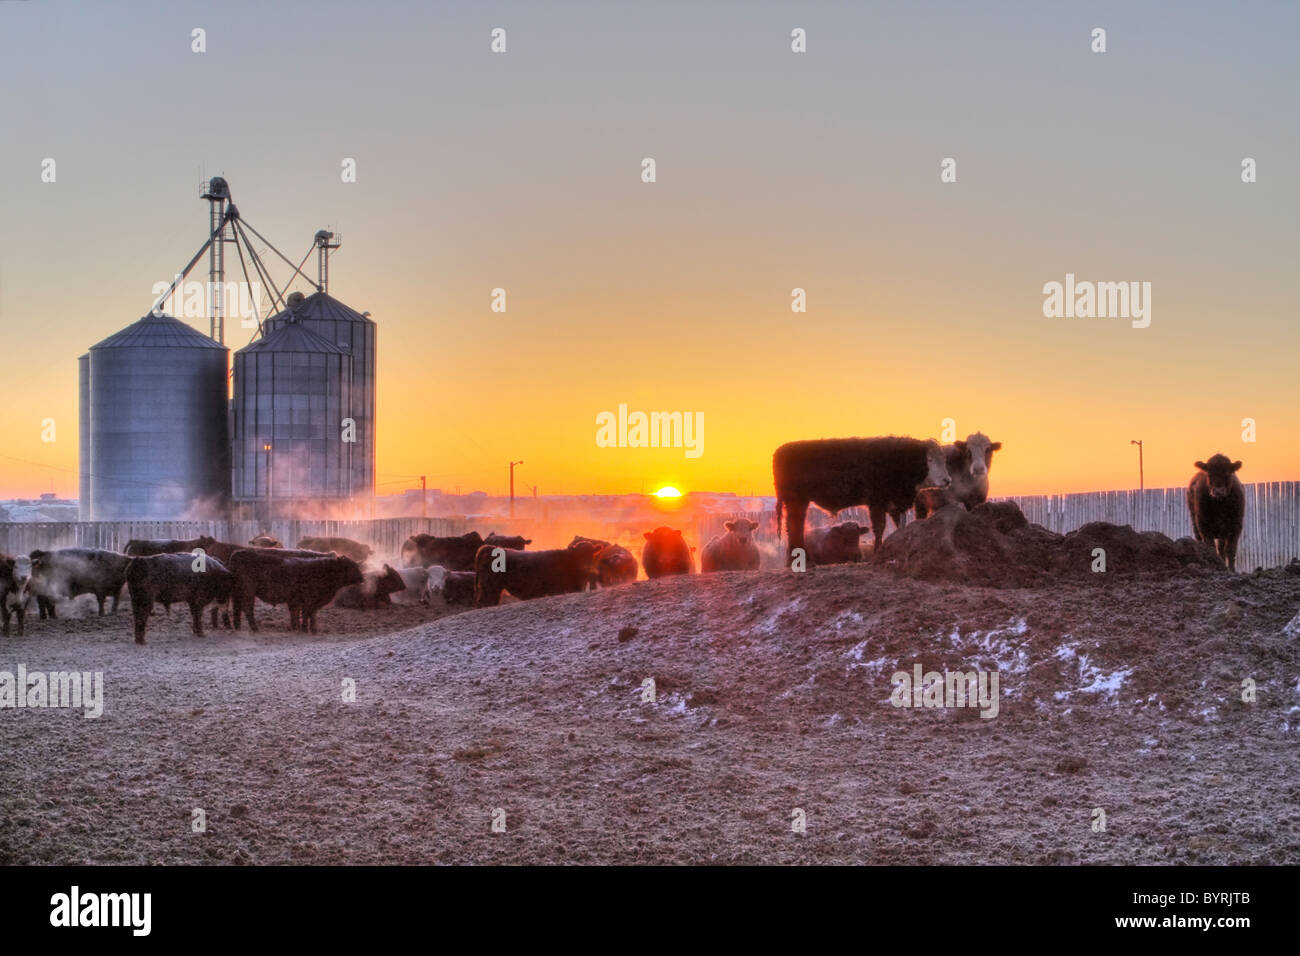 Livestock - Crossbred and mixed breeds of beef cattle in a feedlot pen on a frosty Winter morning at sunrise / Alberta, Canada. Stock Photo